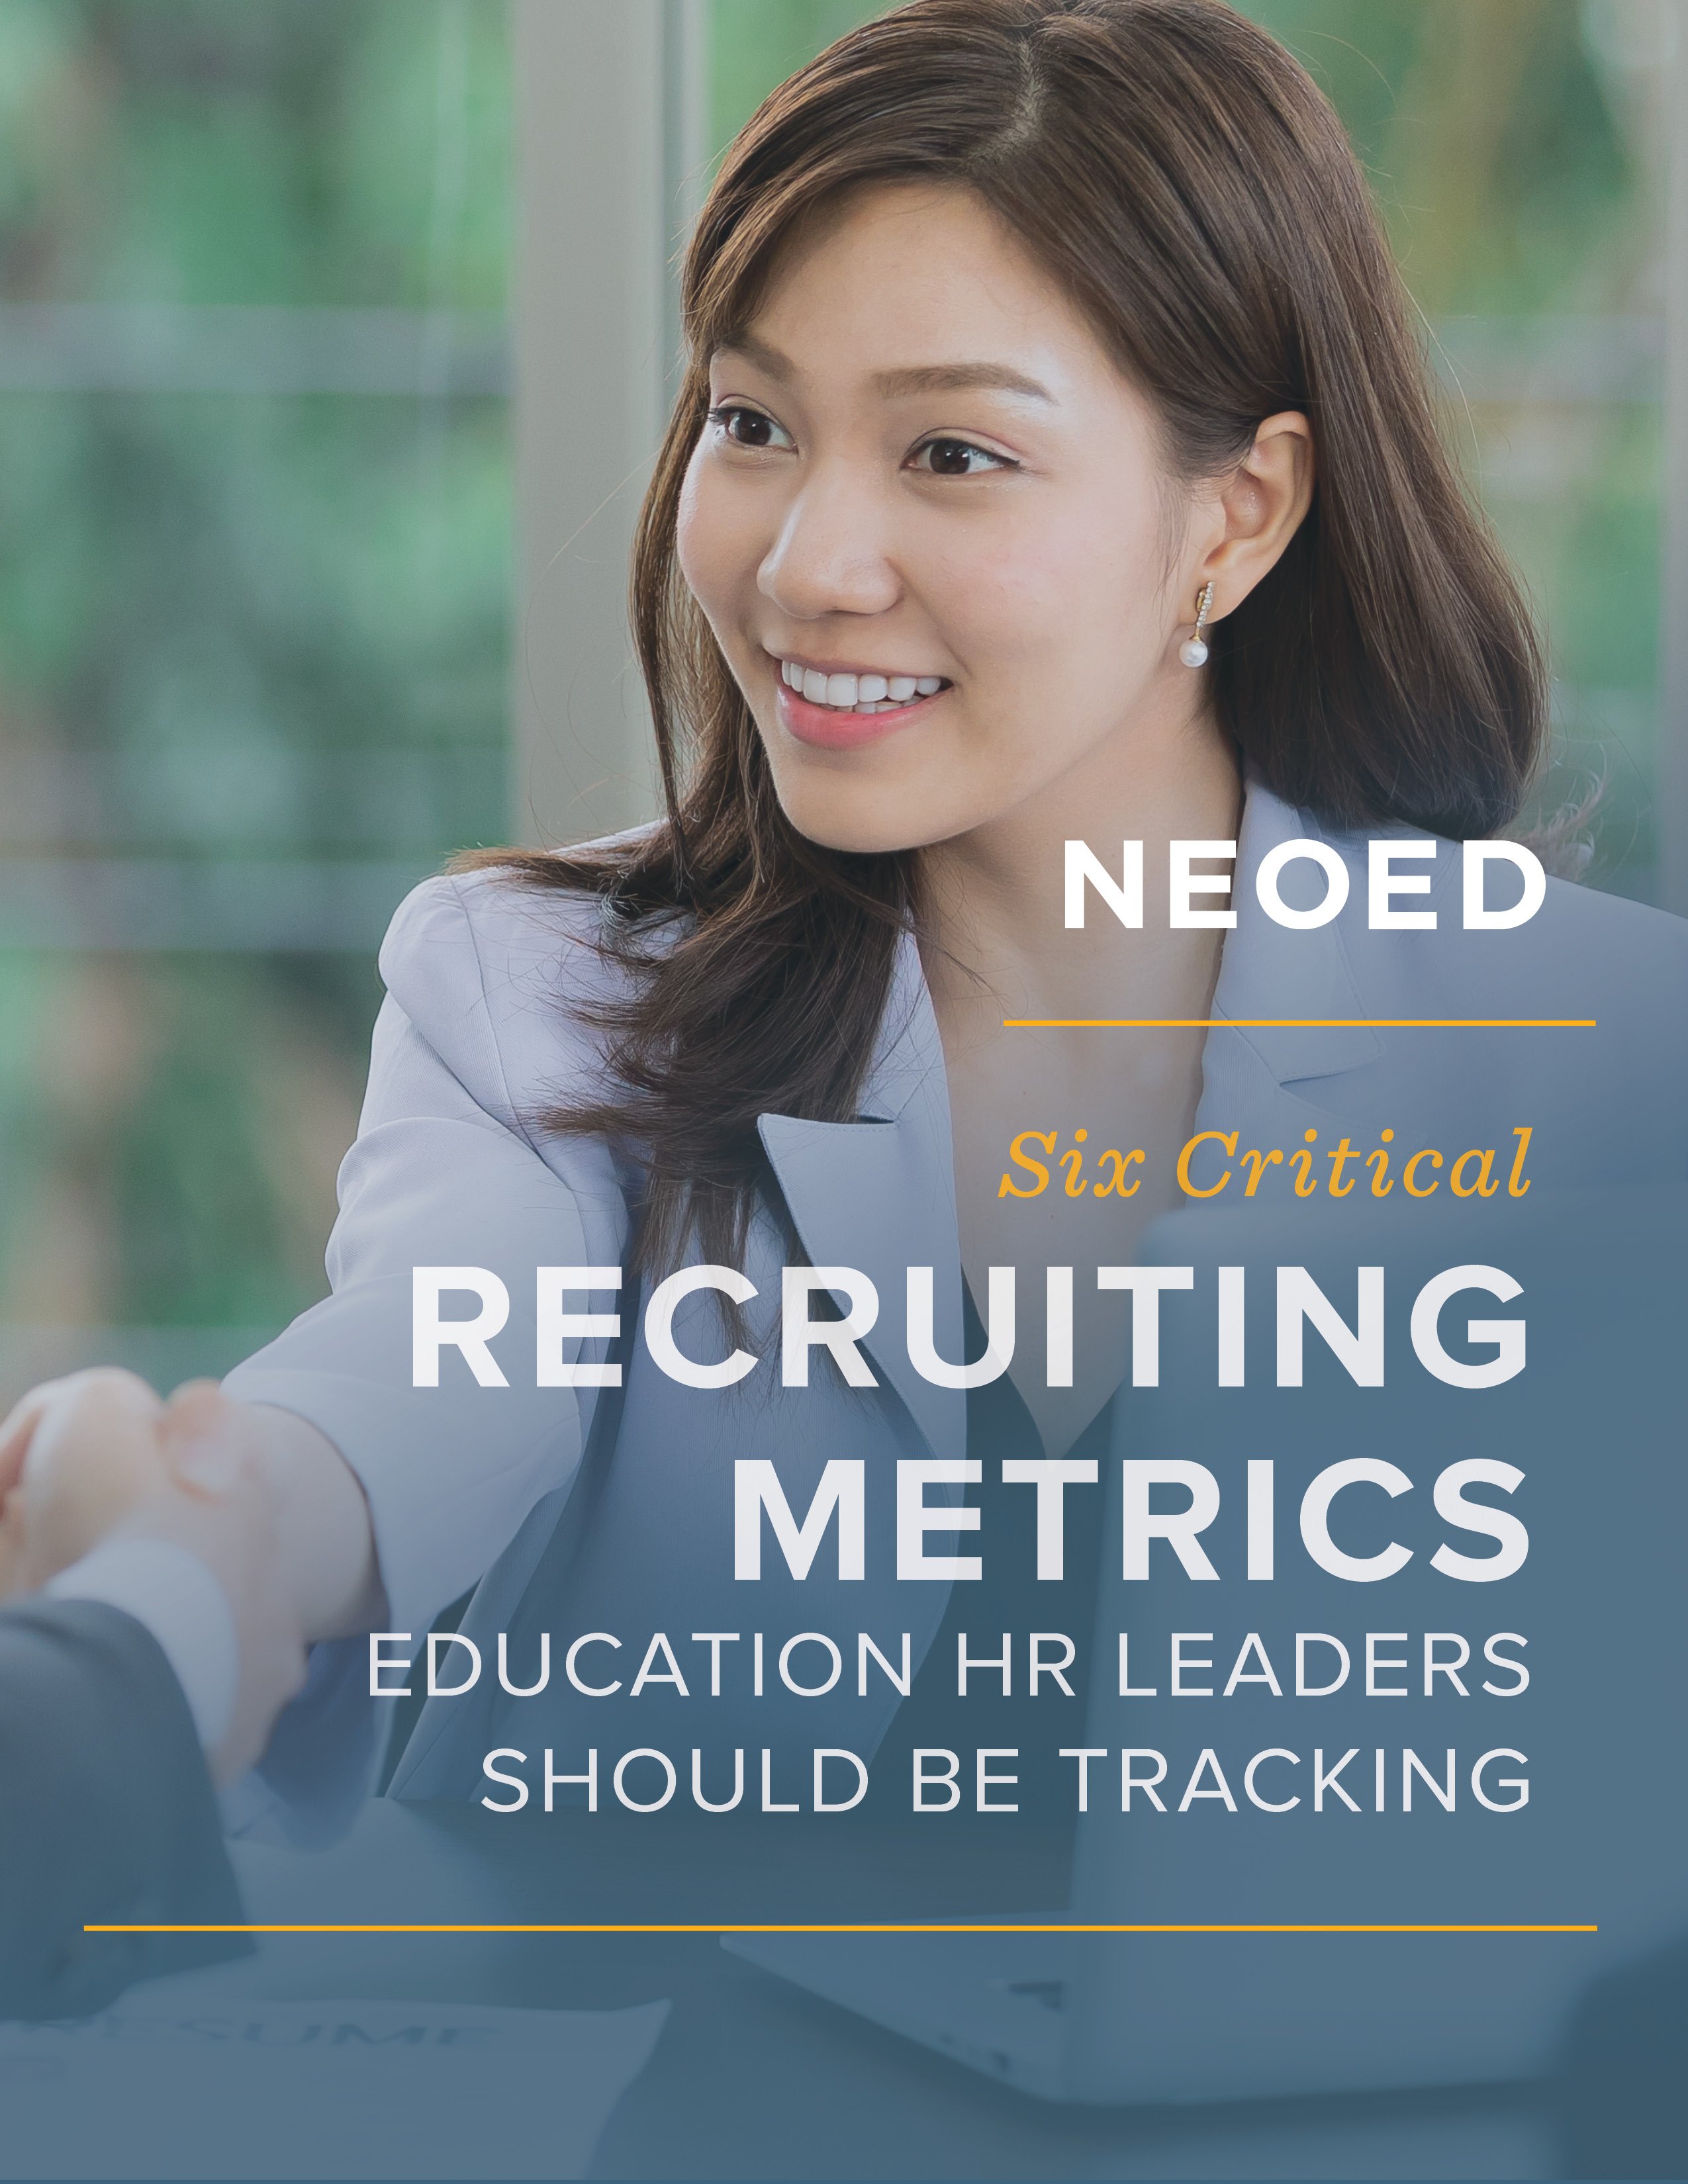 NEOED - 6 Critical Recruiting Metrics Education HR Leaders Should Be Tracking